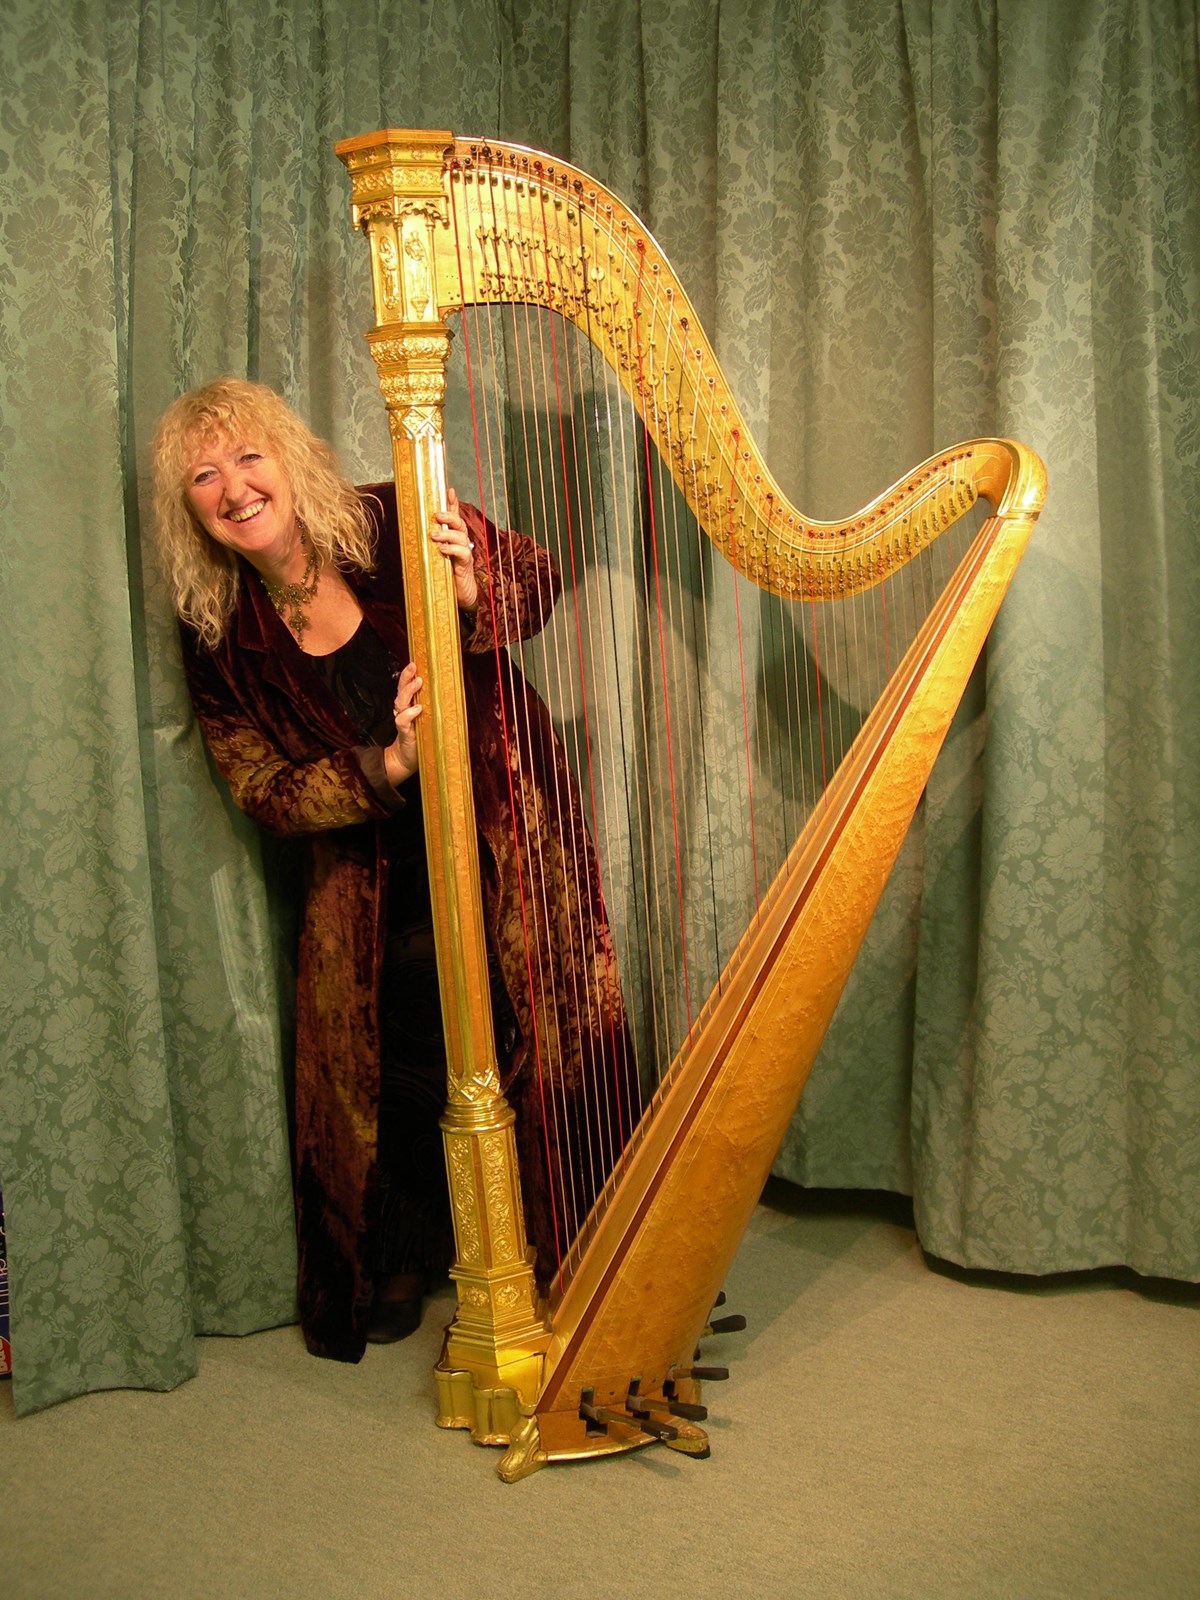 Annie Mawson MBE MRSM BA (Hons) is to receive an Honorary Fellowship from the University of Cumbria during its graduation ceremonies in November 2023 in recognition of her lifelong and outstanding contribution to community music therapy in Cumbria.